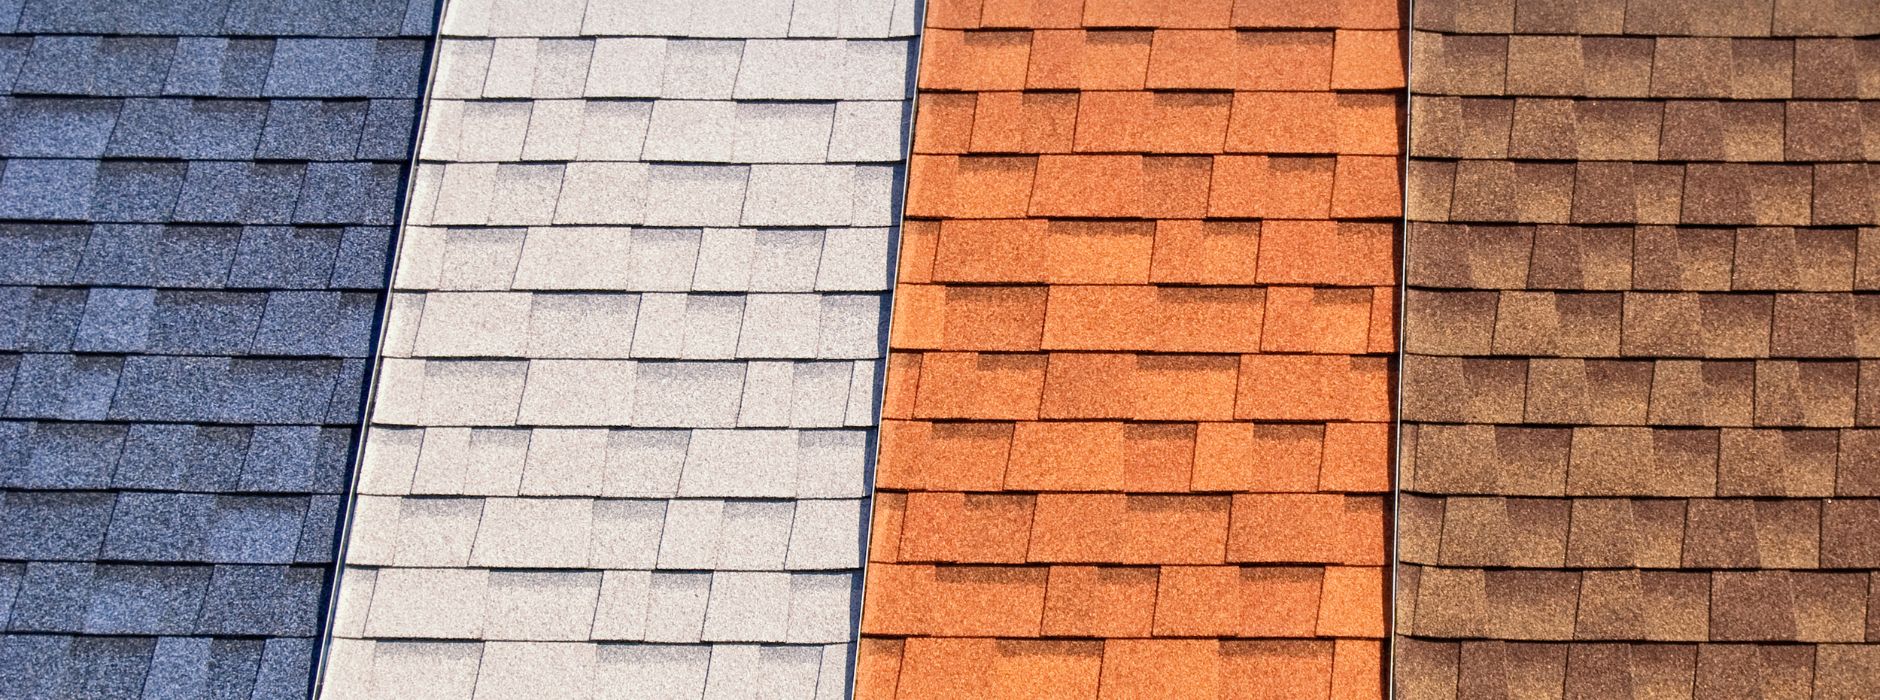 4 Main Roofing Types [Pros, Cons, Costs, and More!]